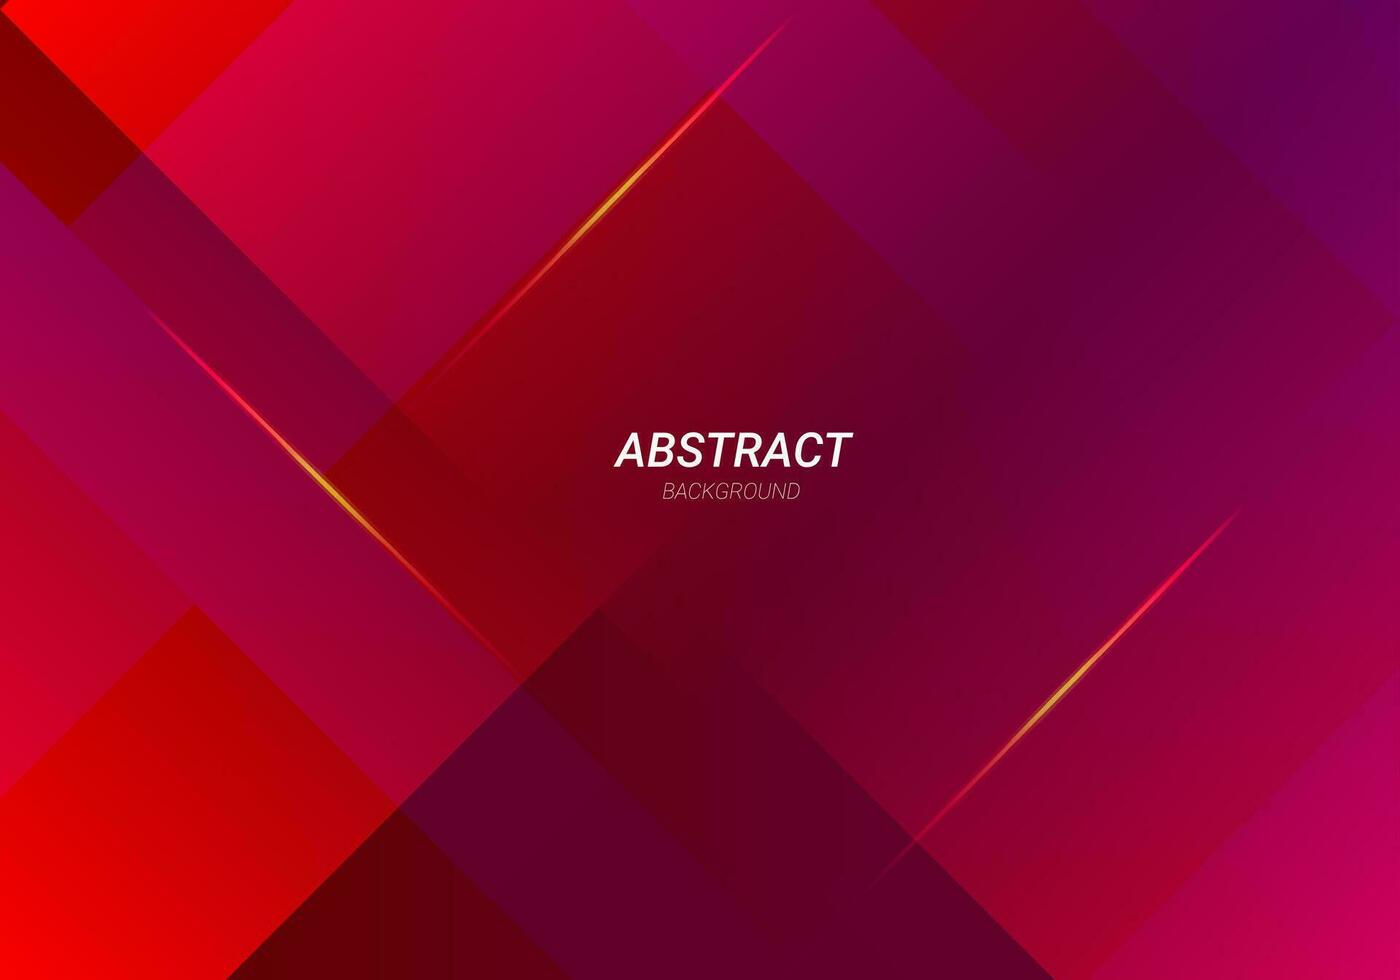 Abstract geometric red pattern modern decorative design background vector